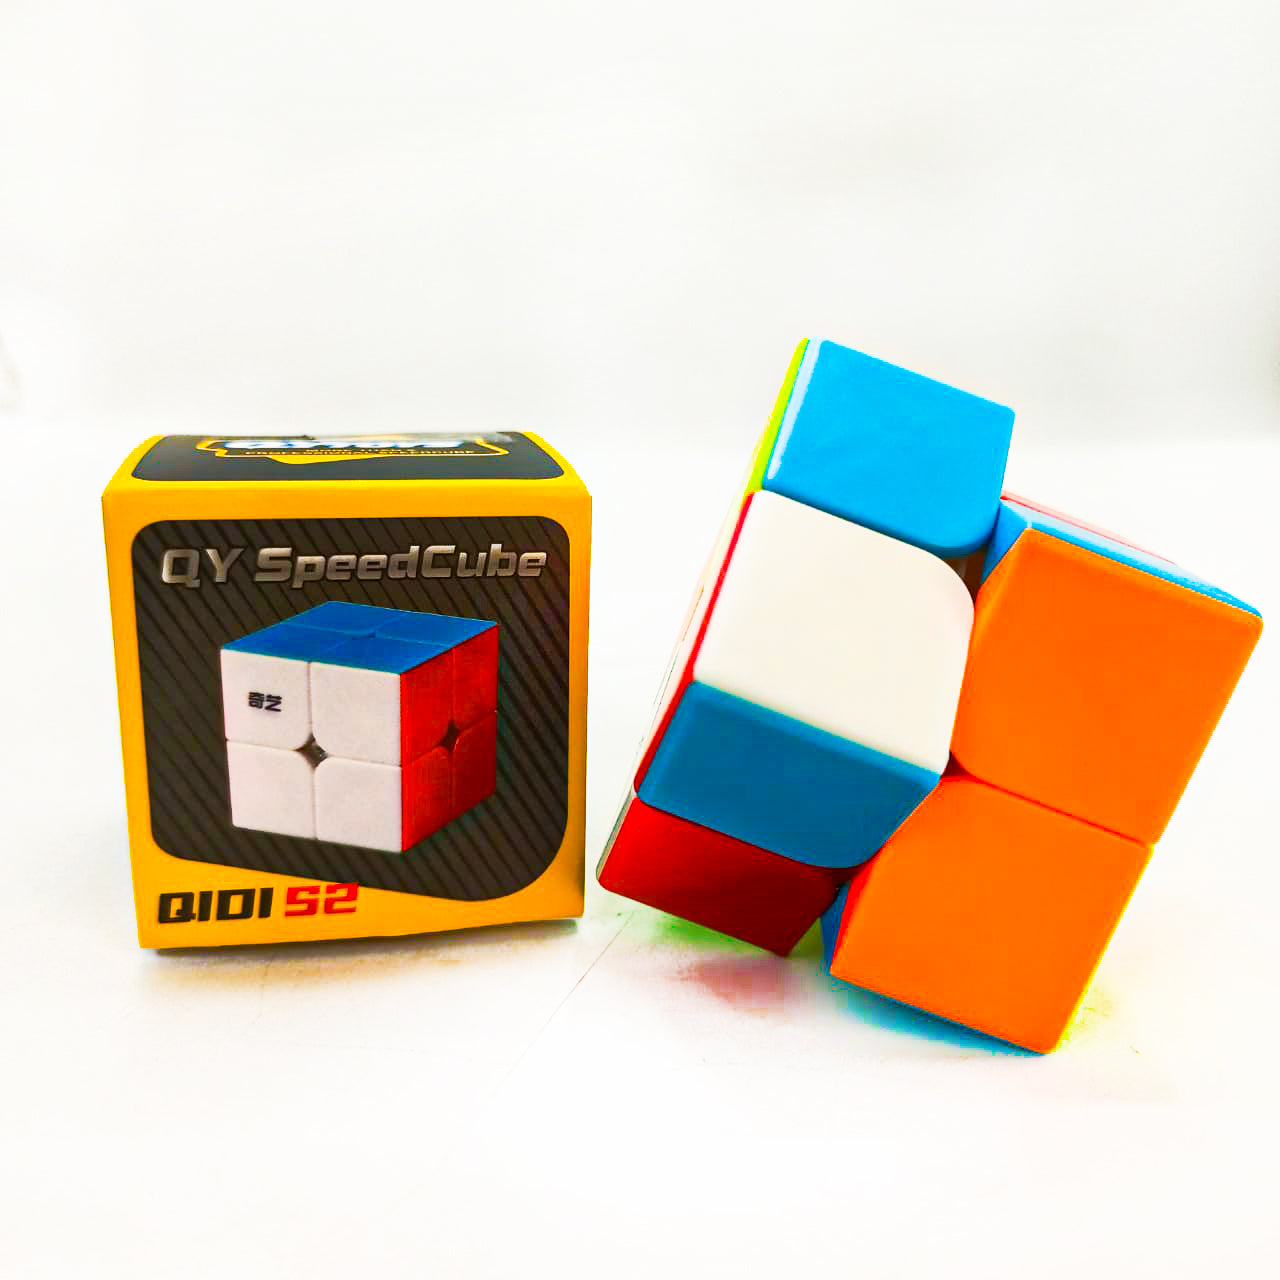 Mind Brain Magic Cube Problem Solving Game for Kids and Adults